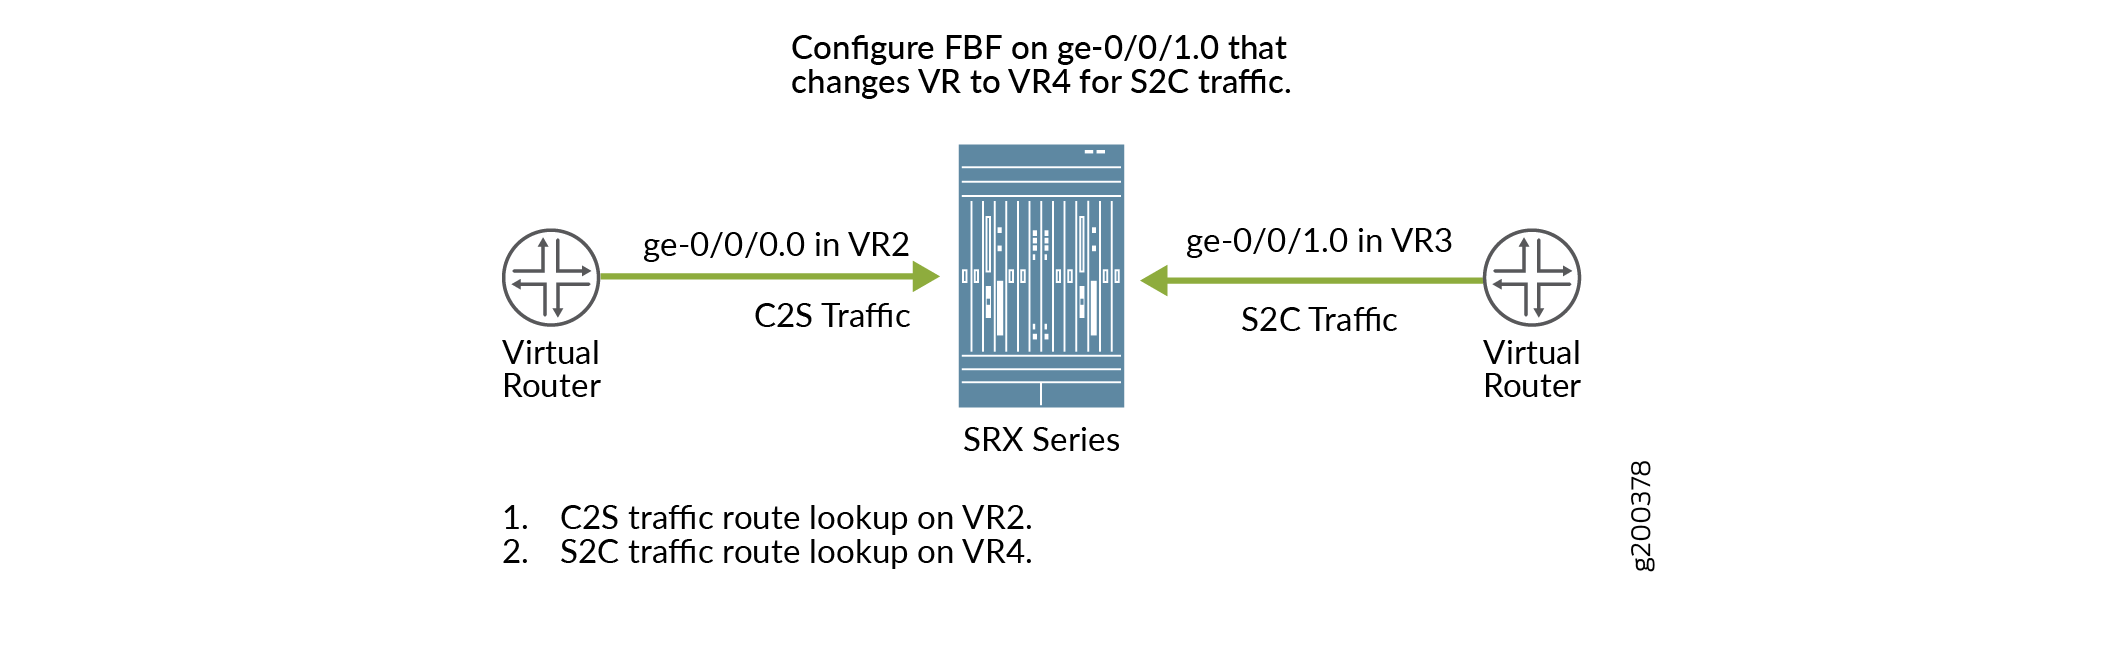 Reverse Route Enabled with FBF